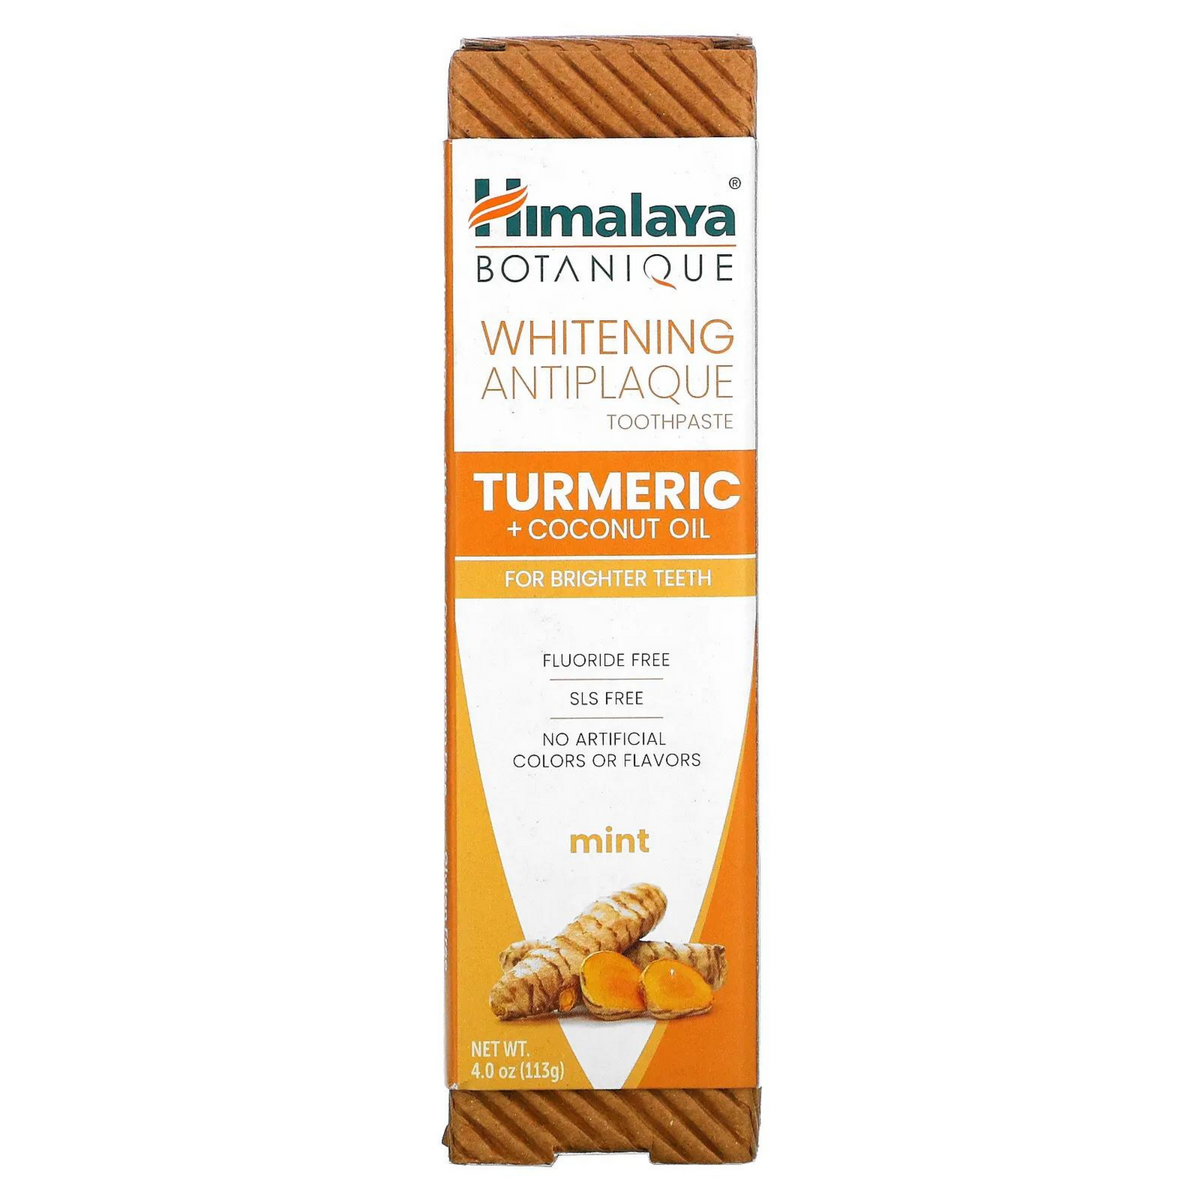 Primary Image of Turmeric and Coconut Oil Toothpaste